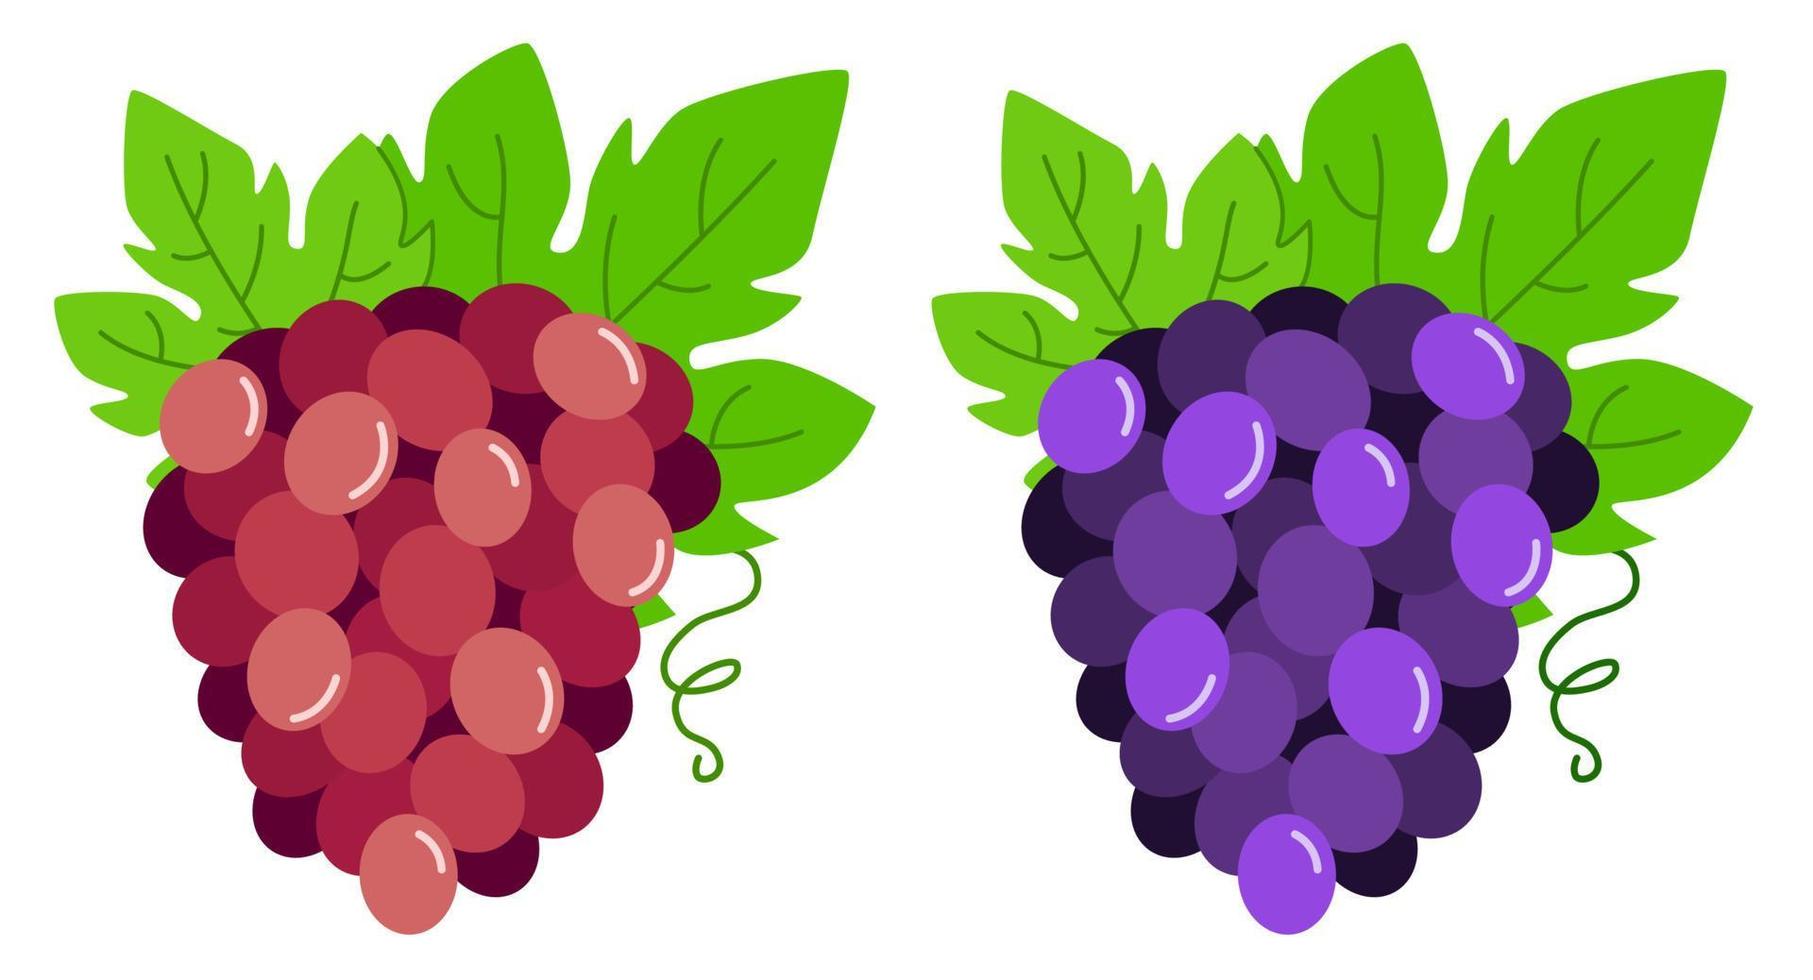 Bunches of violet and red grapes. Vector illustration of grapes with leaves.